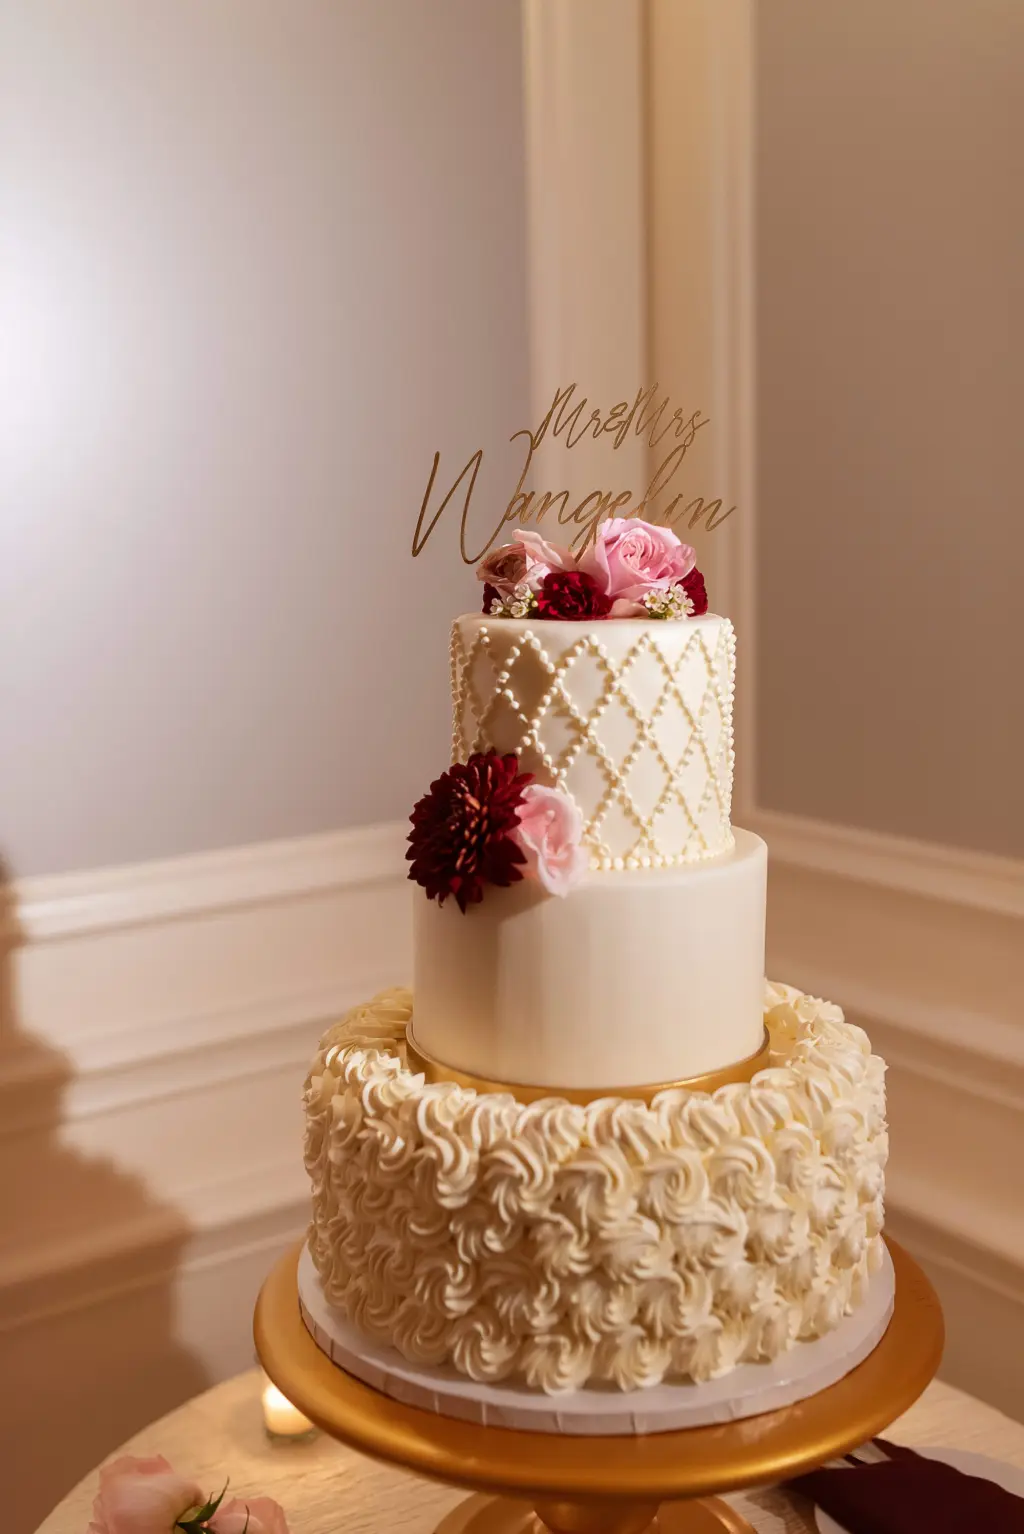 Three-Tiered Round White, Ivory and Gold Textured Wedding Cake With Burgundy Chrysanthemums and Pink Flowers | Gold Last Name Cake Topper